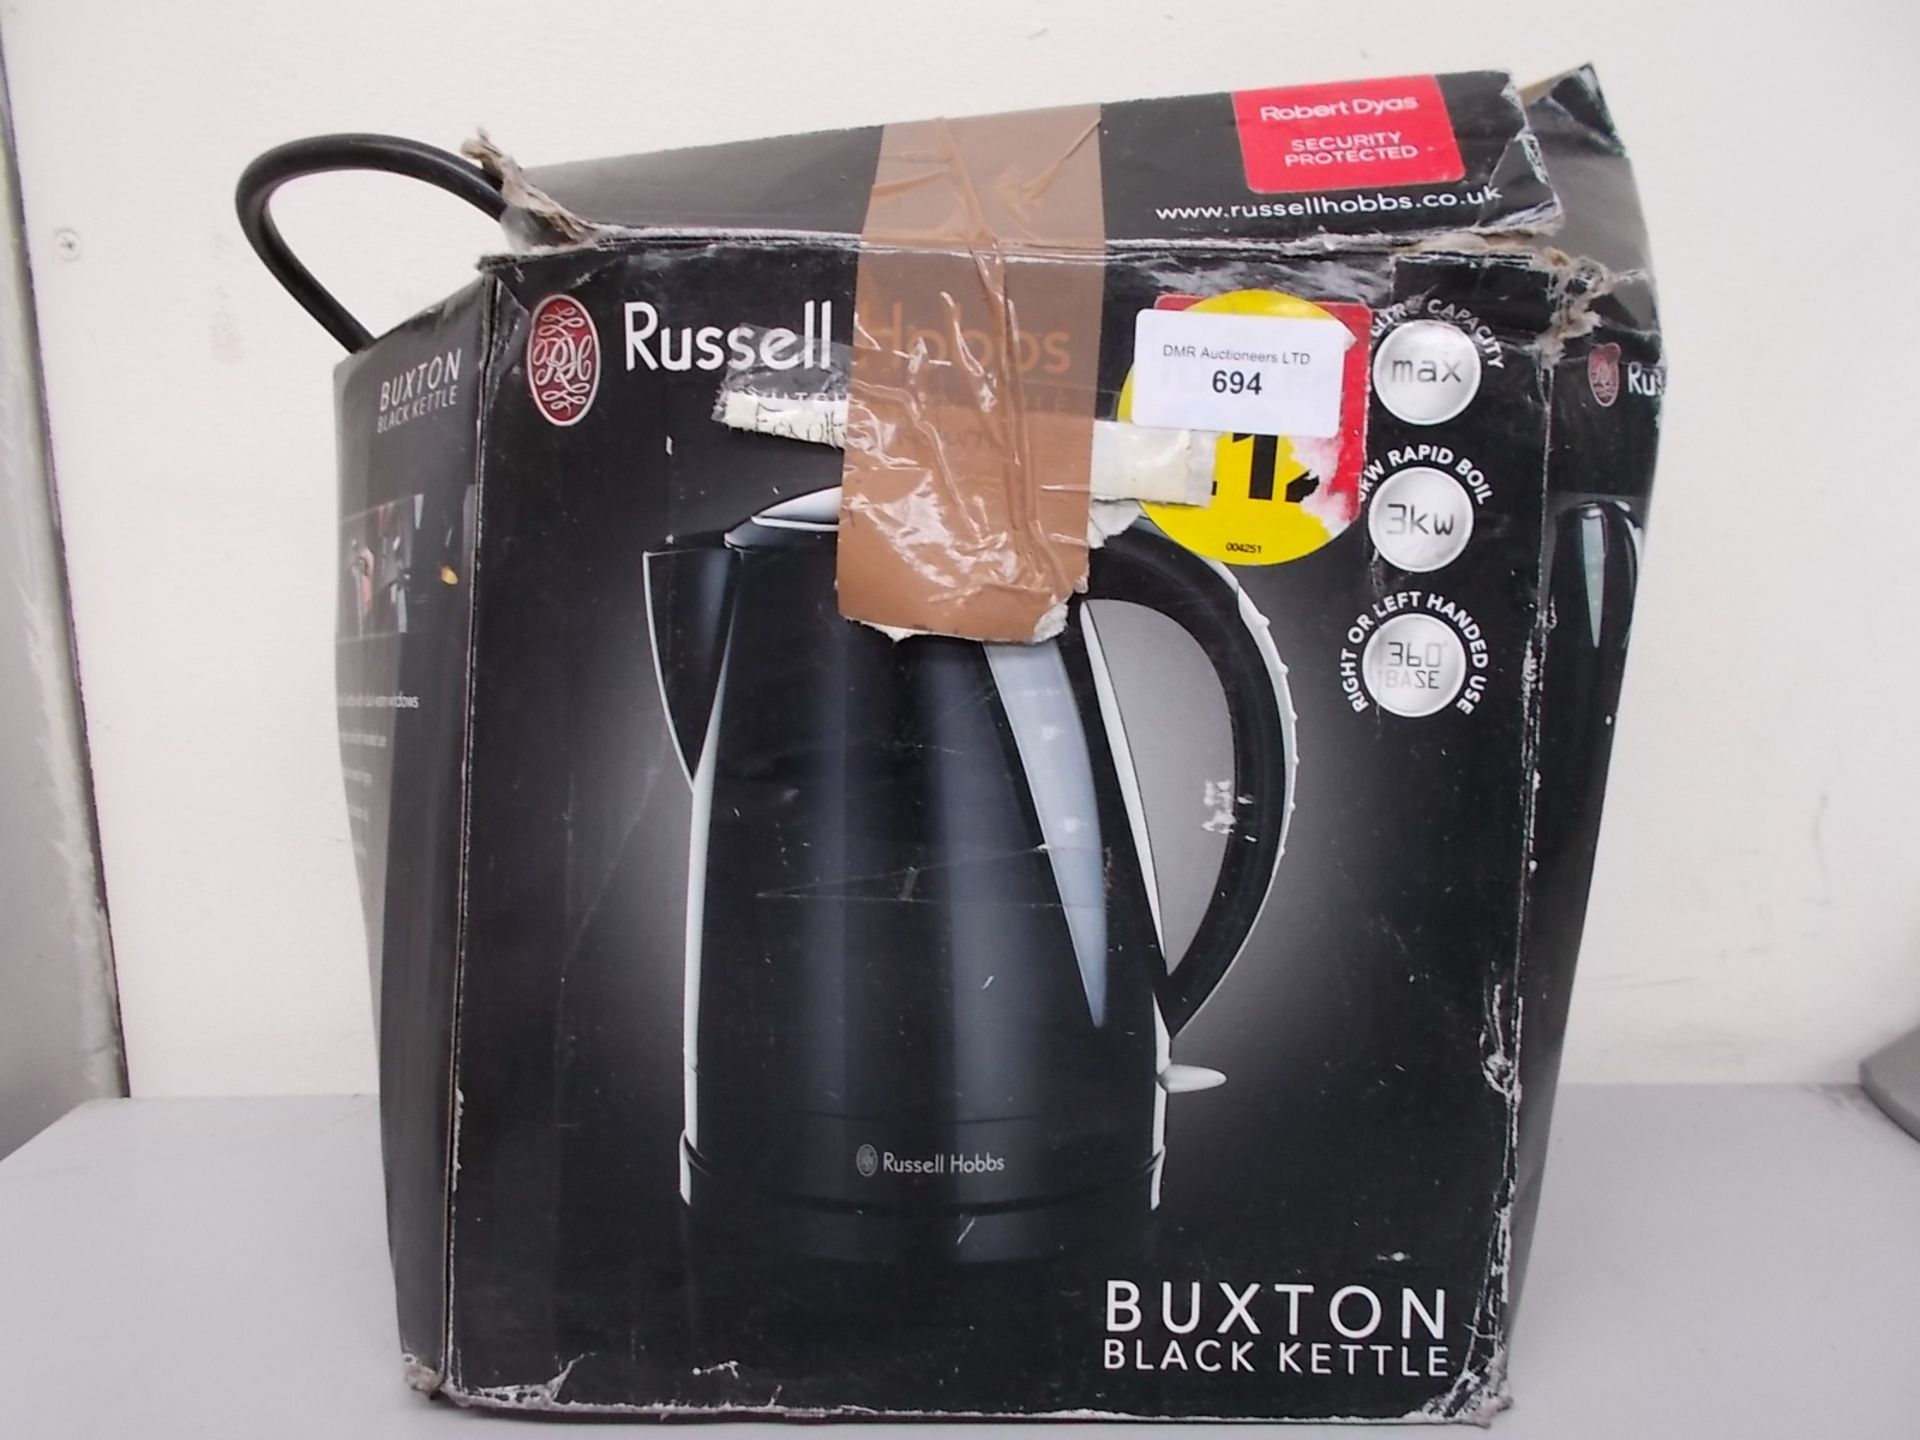 1 BOXED RUSSELL HOBBS BUXTON BLACK KETTLE